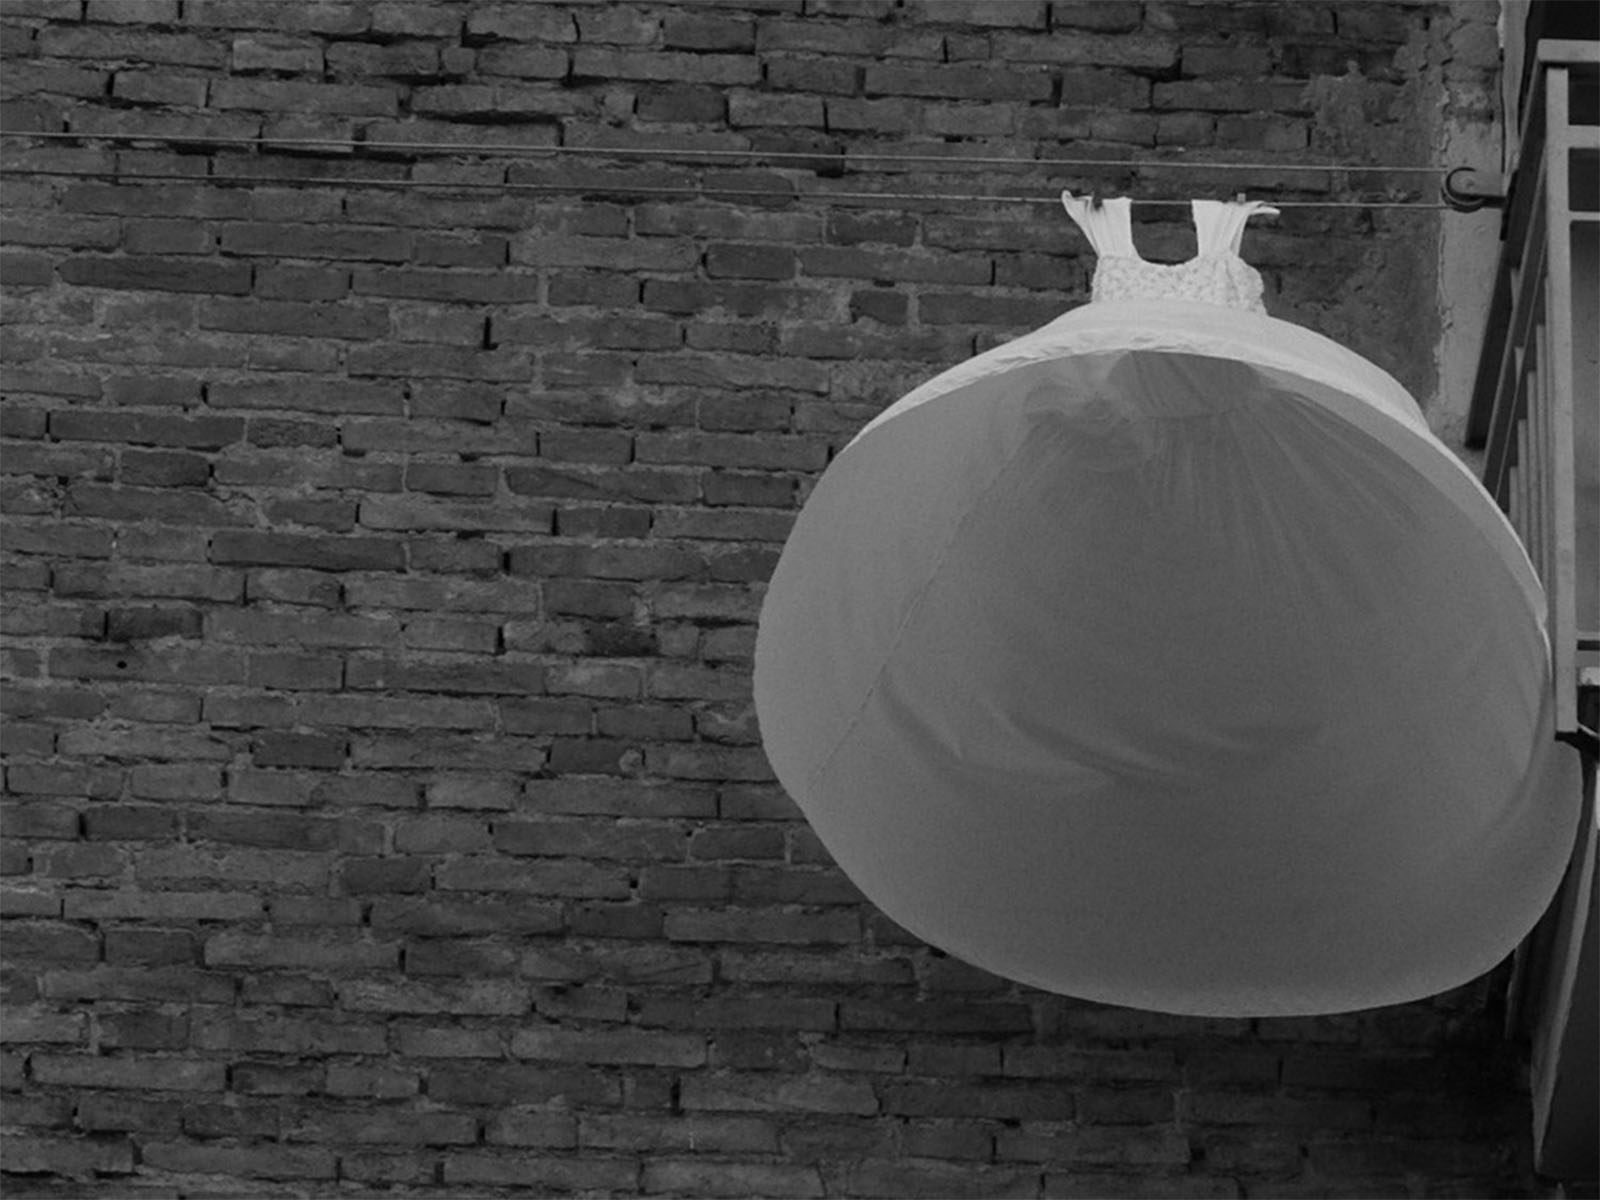 A white dress hangs on a clothesline next to a brick wall. The angle of the photo captures the dress from below, creating a balloon-like appearance. The scene is in black and white, emphasizing the contrast between the dress and the textured brick background.